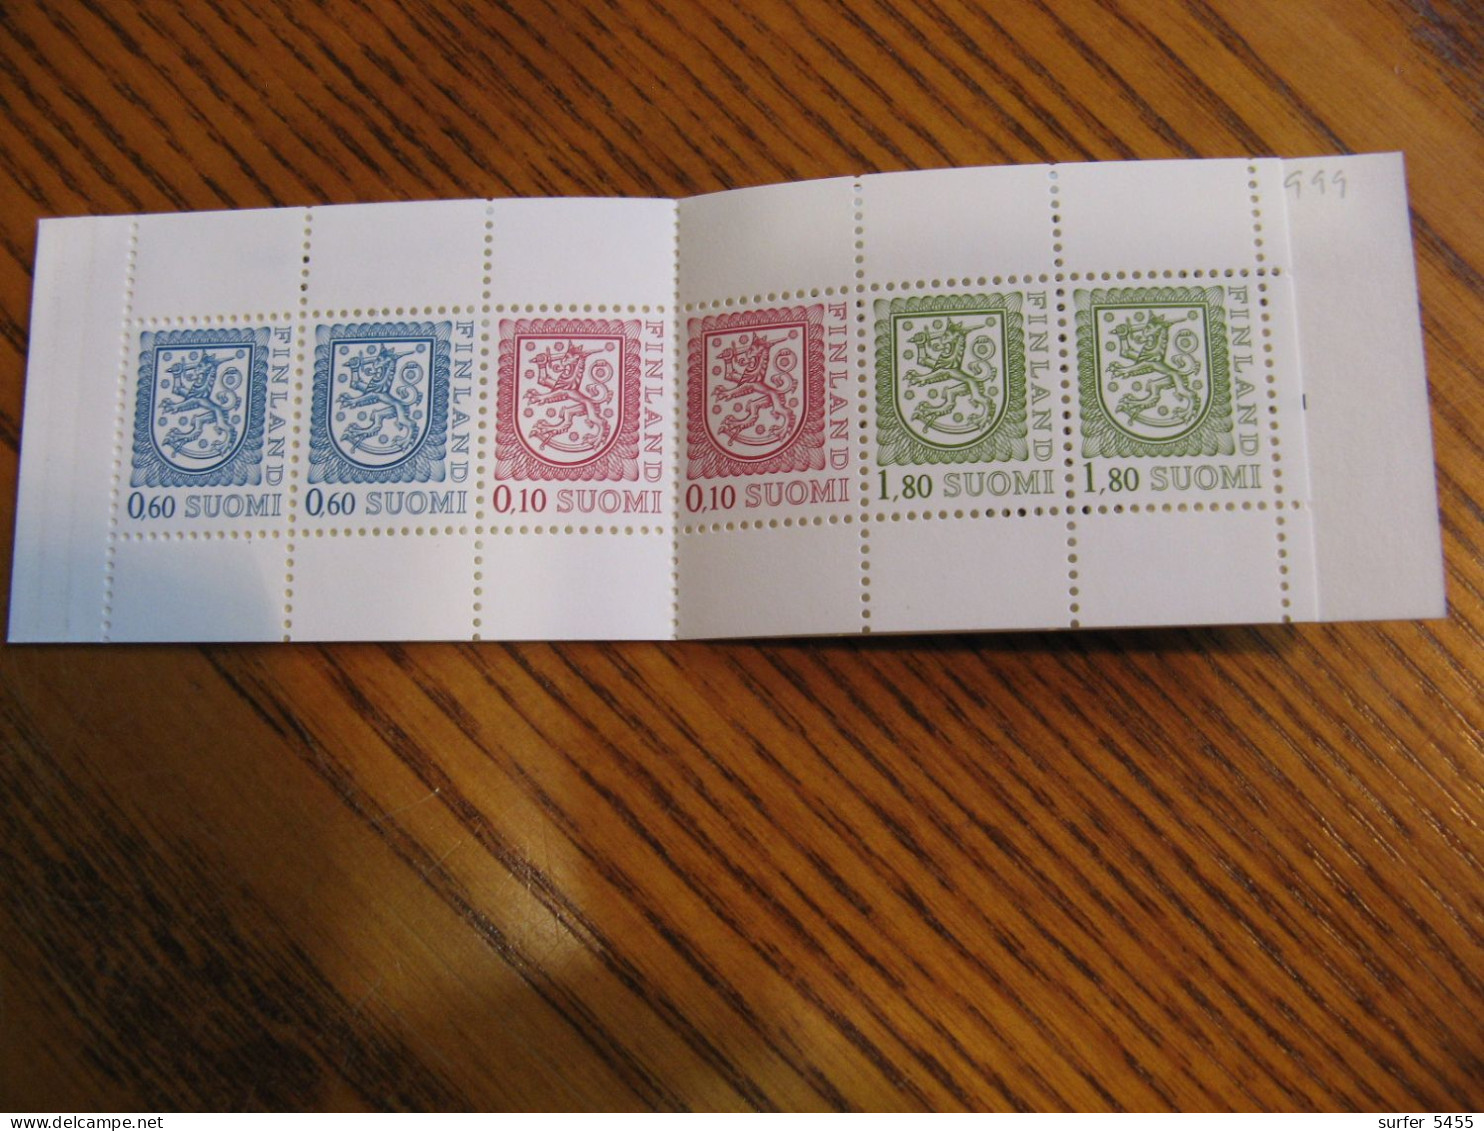 FINLANDE CARNET N° 999a NEUF** LUXE - MNH - COTE YVERT 2012 : 3,50 EUROS - Unused Stamps